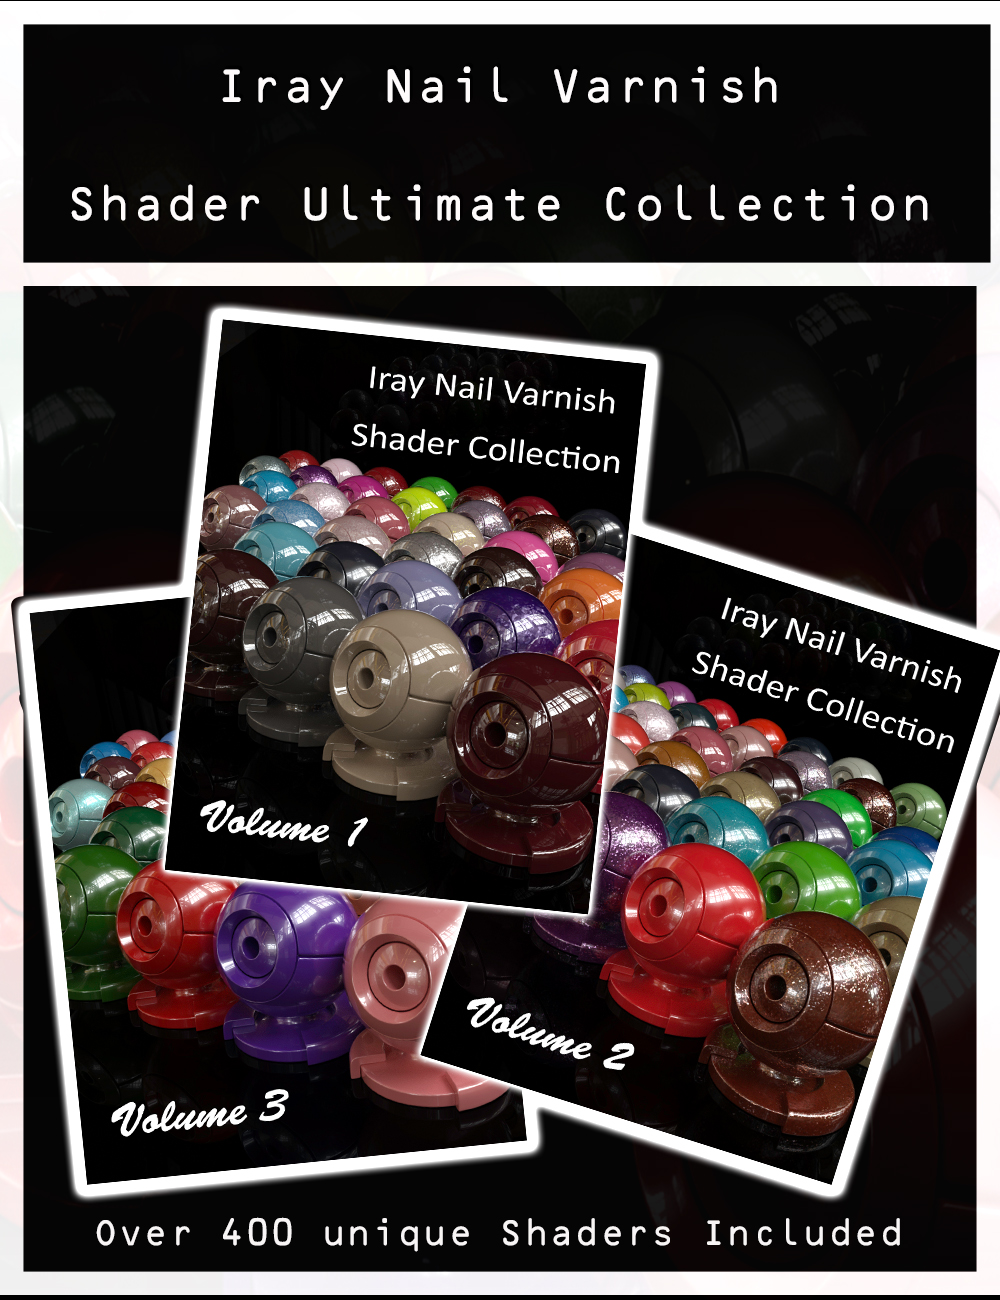 Iray Nail Varnish Shaders Ultimate Collection by: Serum, 3D Models by Daz 3D